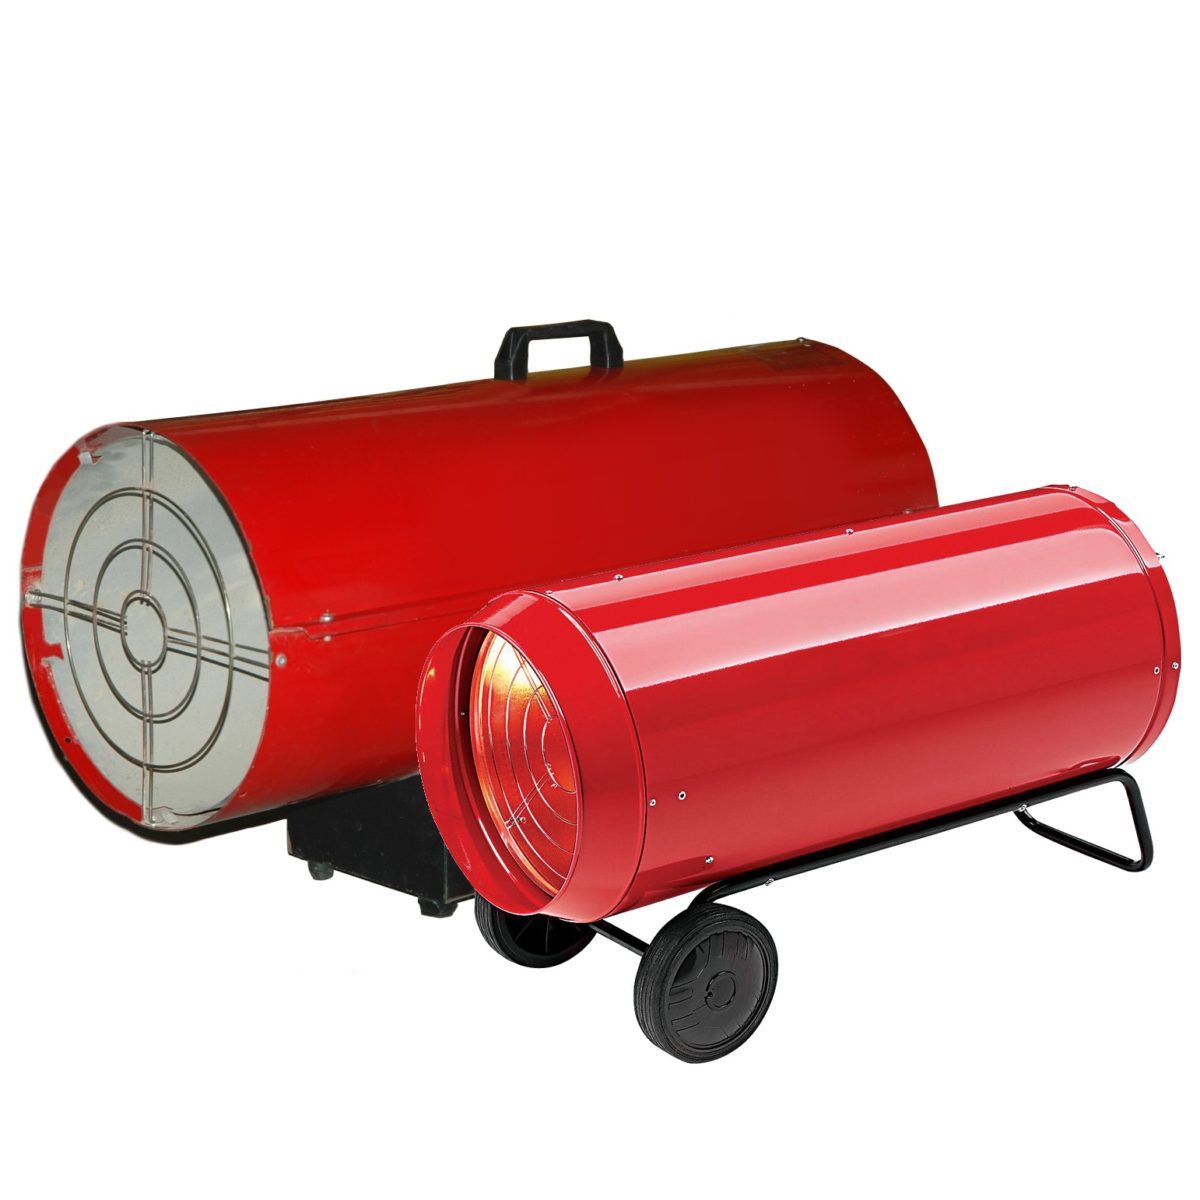 Industrial infrared heaters uk